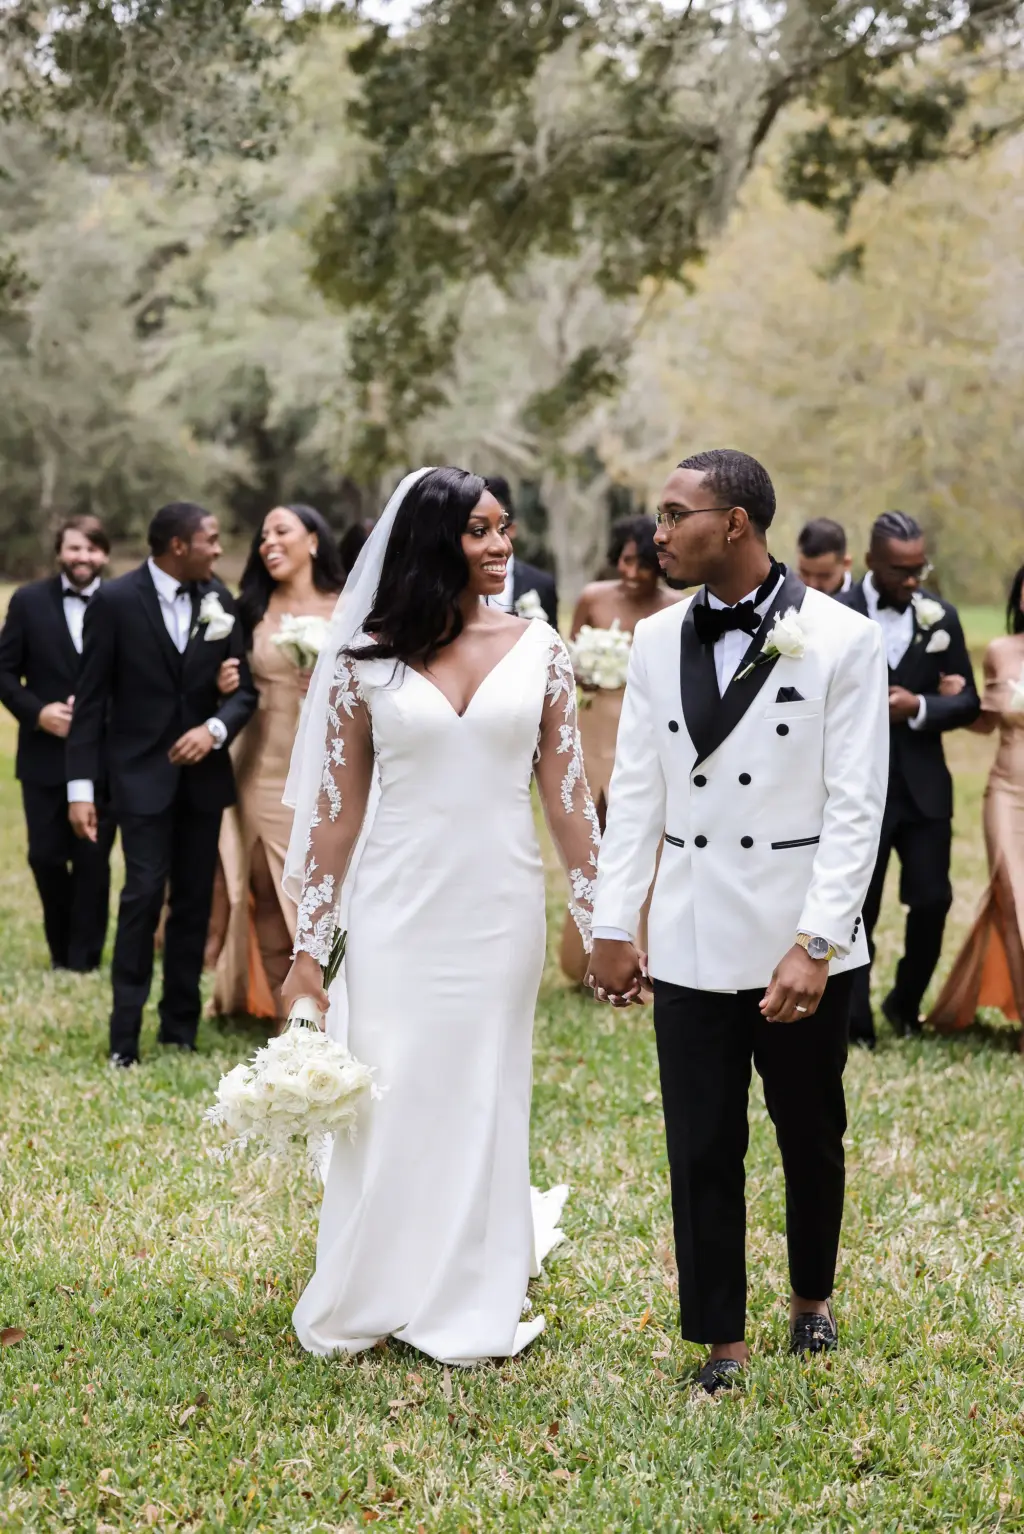 White and Black Groom Tuxedo Inspiration | Sheer Lace Long Sleeve Fit and Flare Wedding Dress Ideas | Tampa Photographer Lifelong Photography Studio